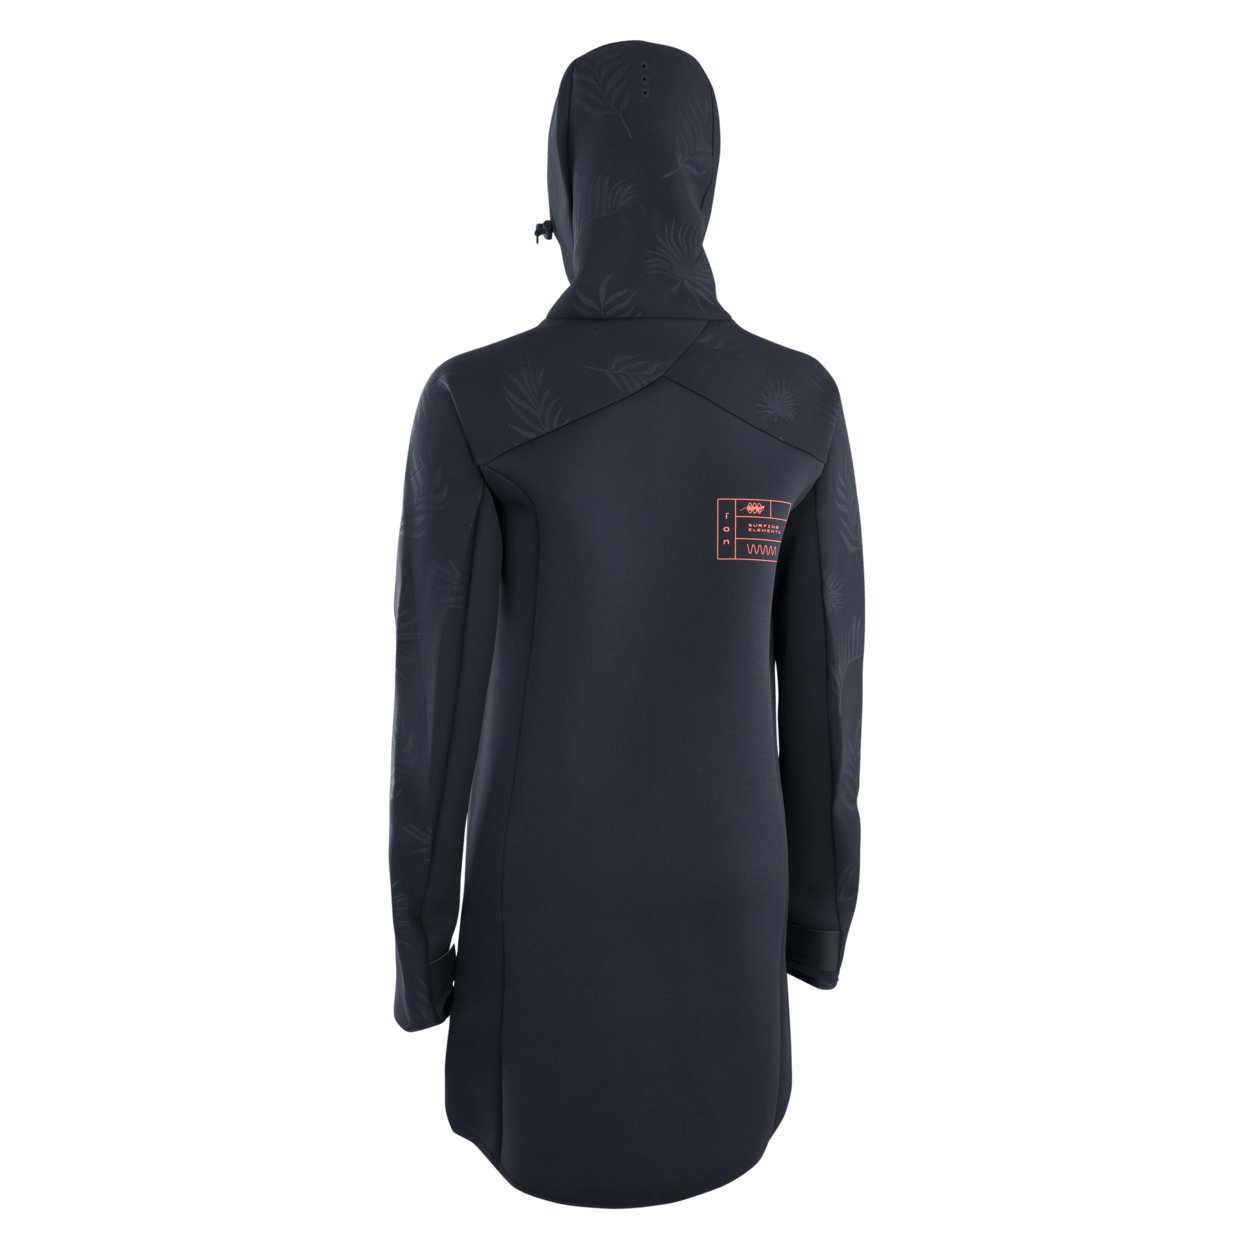 ION Neo Cosy Coat Core women 2023 - Worthing Watersports - 9010583118529 - Tops - ION Water